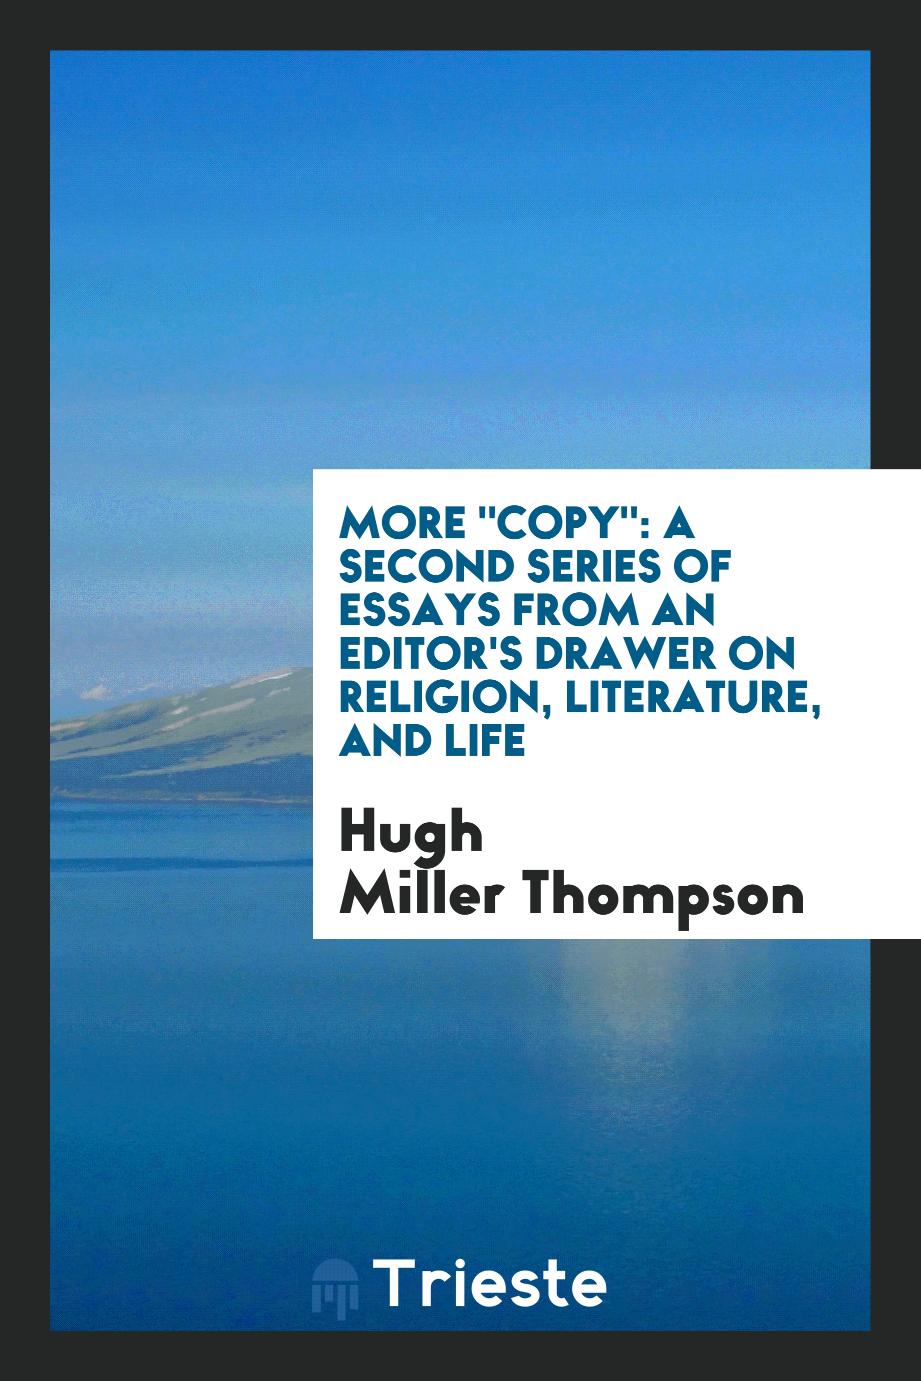 More "Copy": A Second Series of Essays from an Editor's Drawer on Religion, Literature, and Life